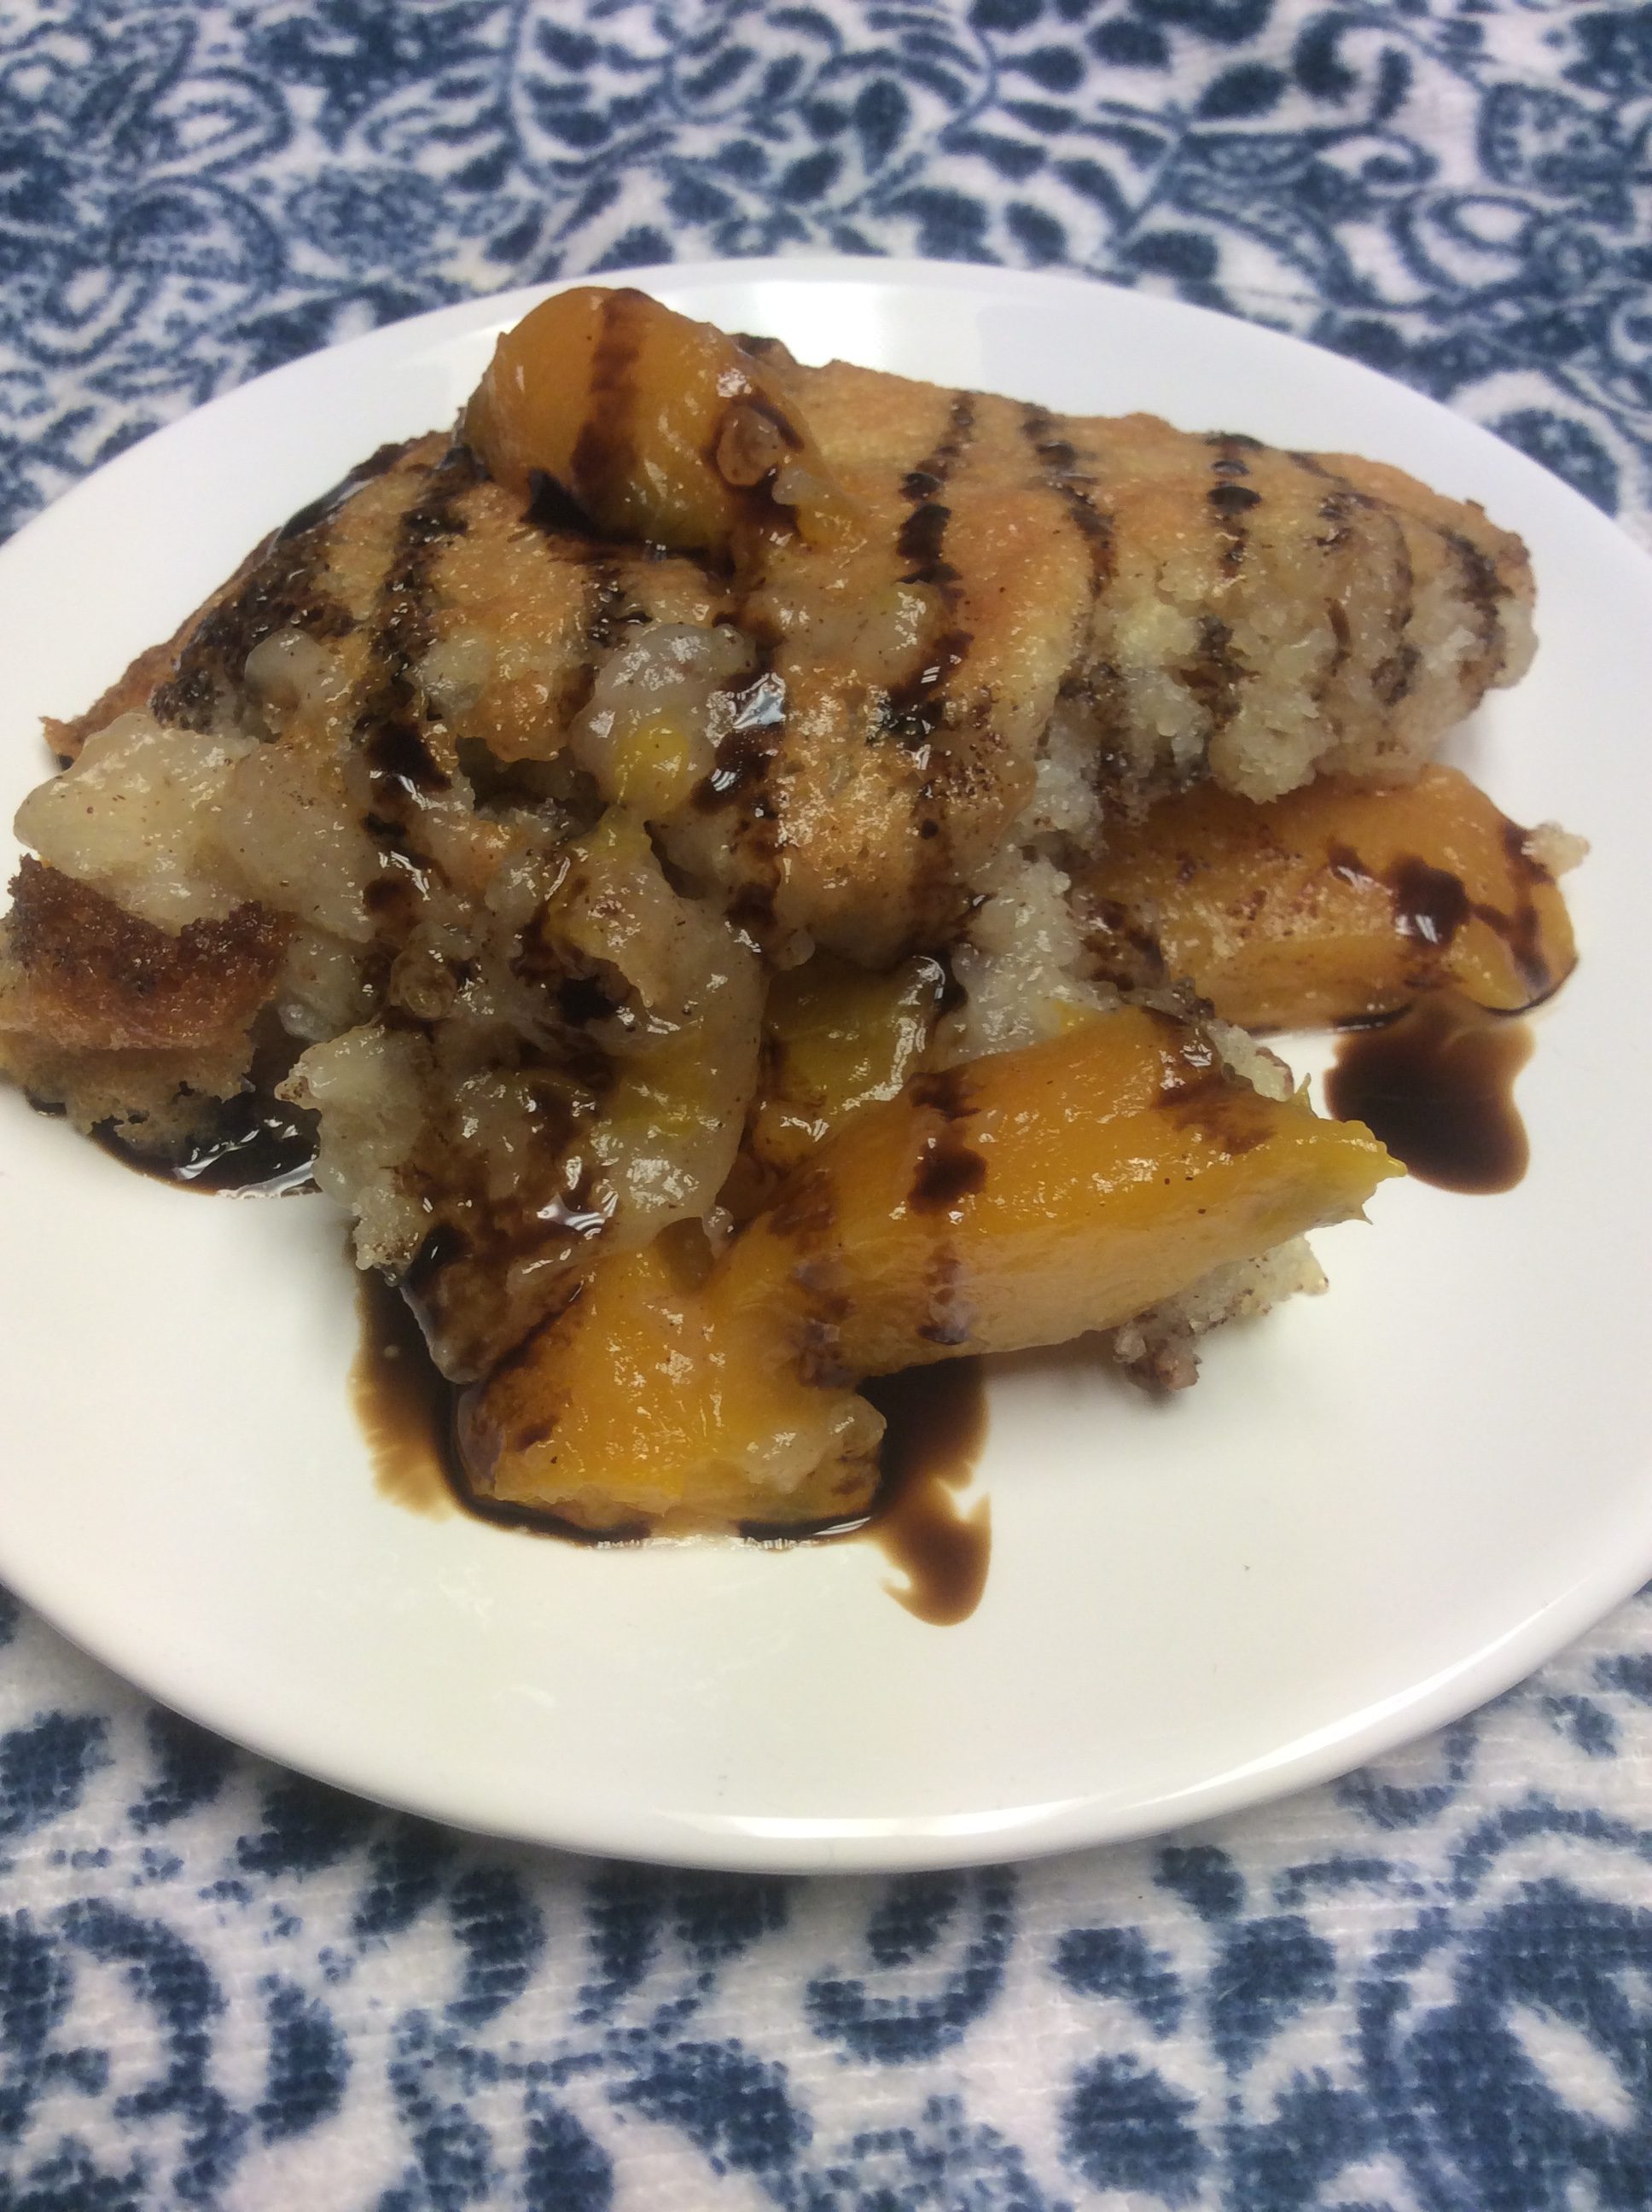 Peach Cobbler with Balsamic Drizzle